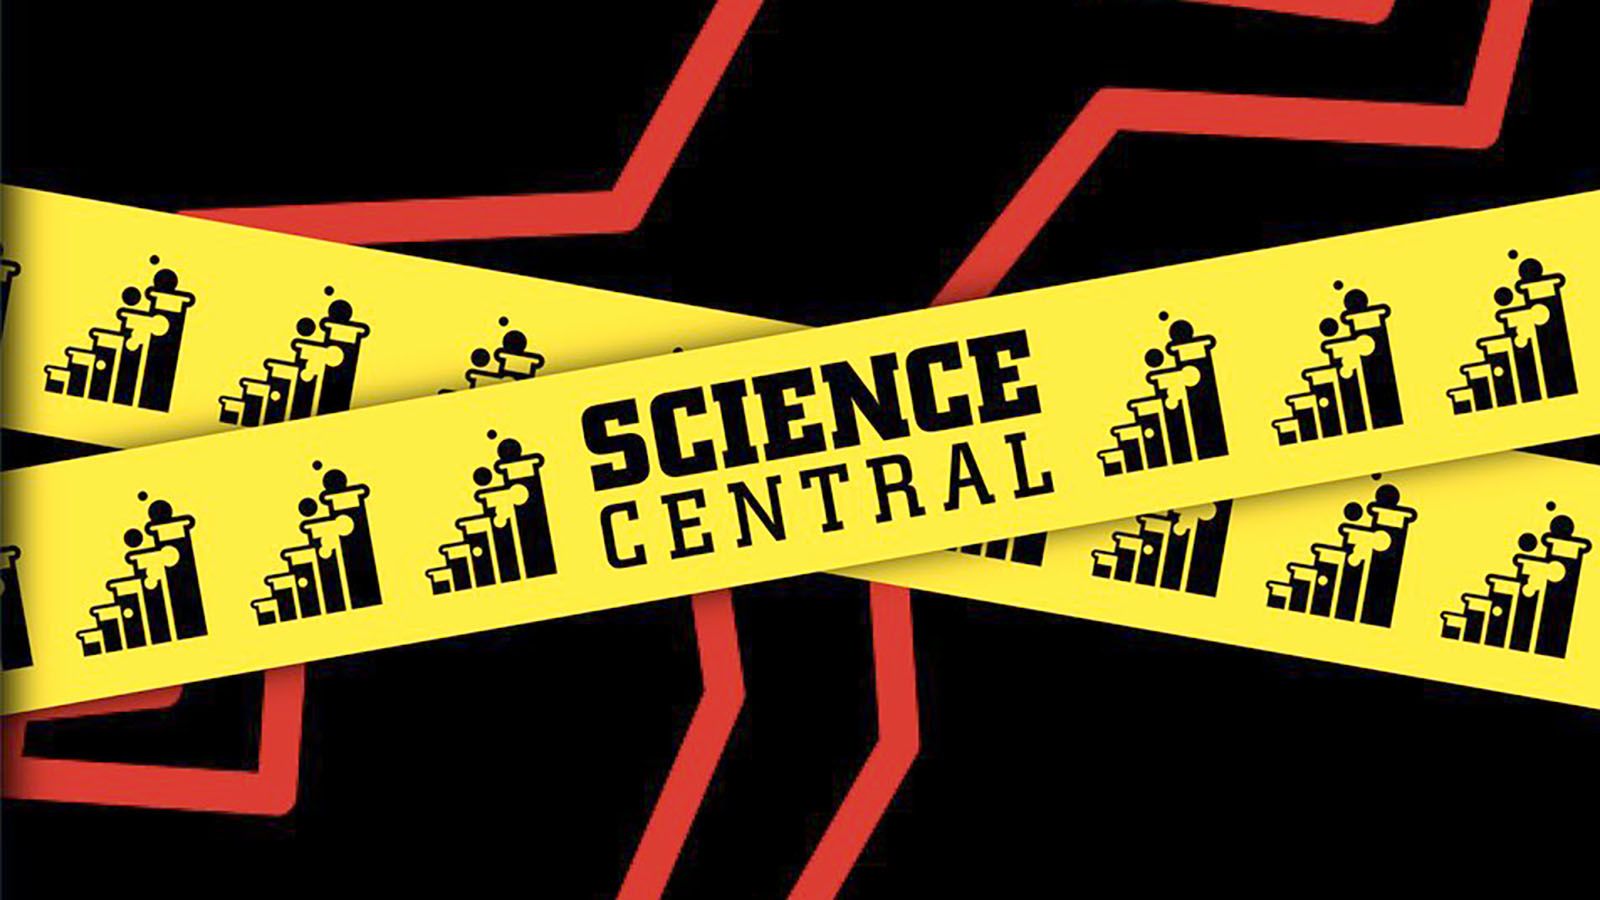 Solve a mystery at Science Central on Saturday, Feb. 10.